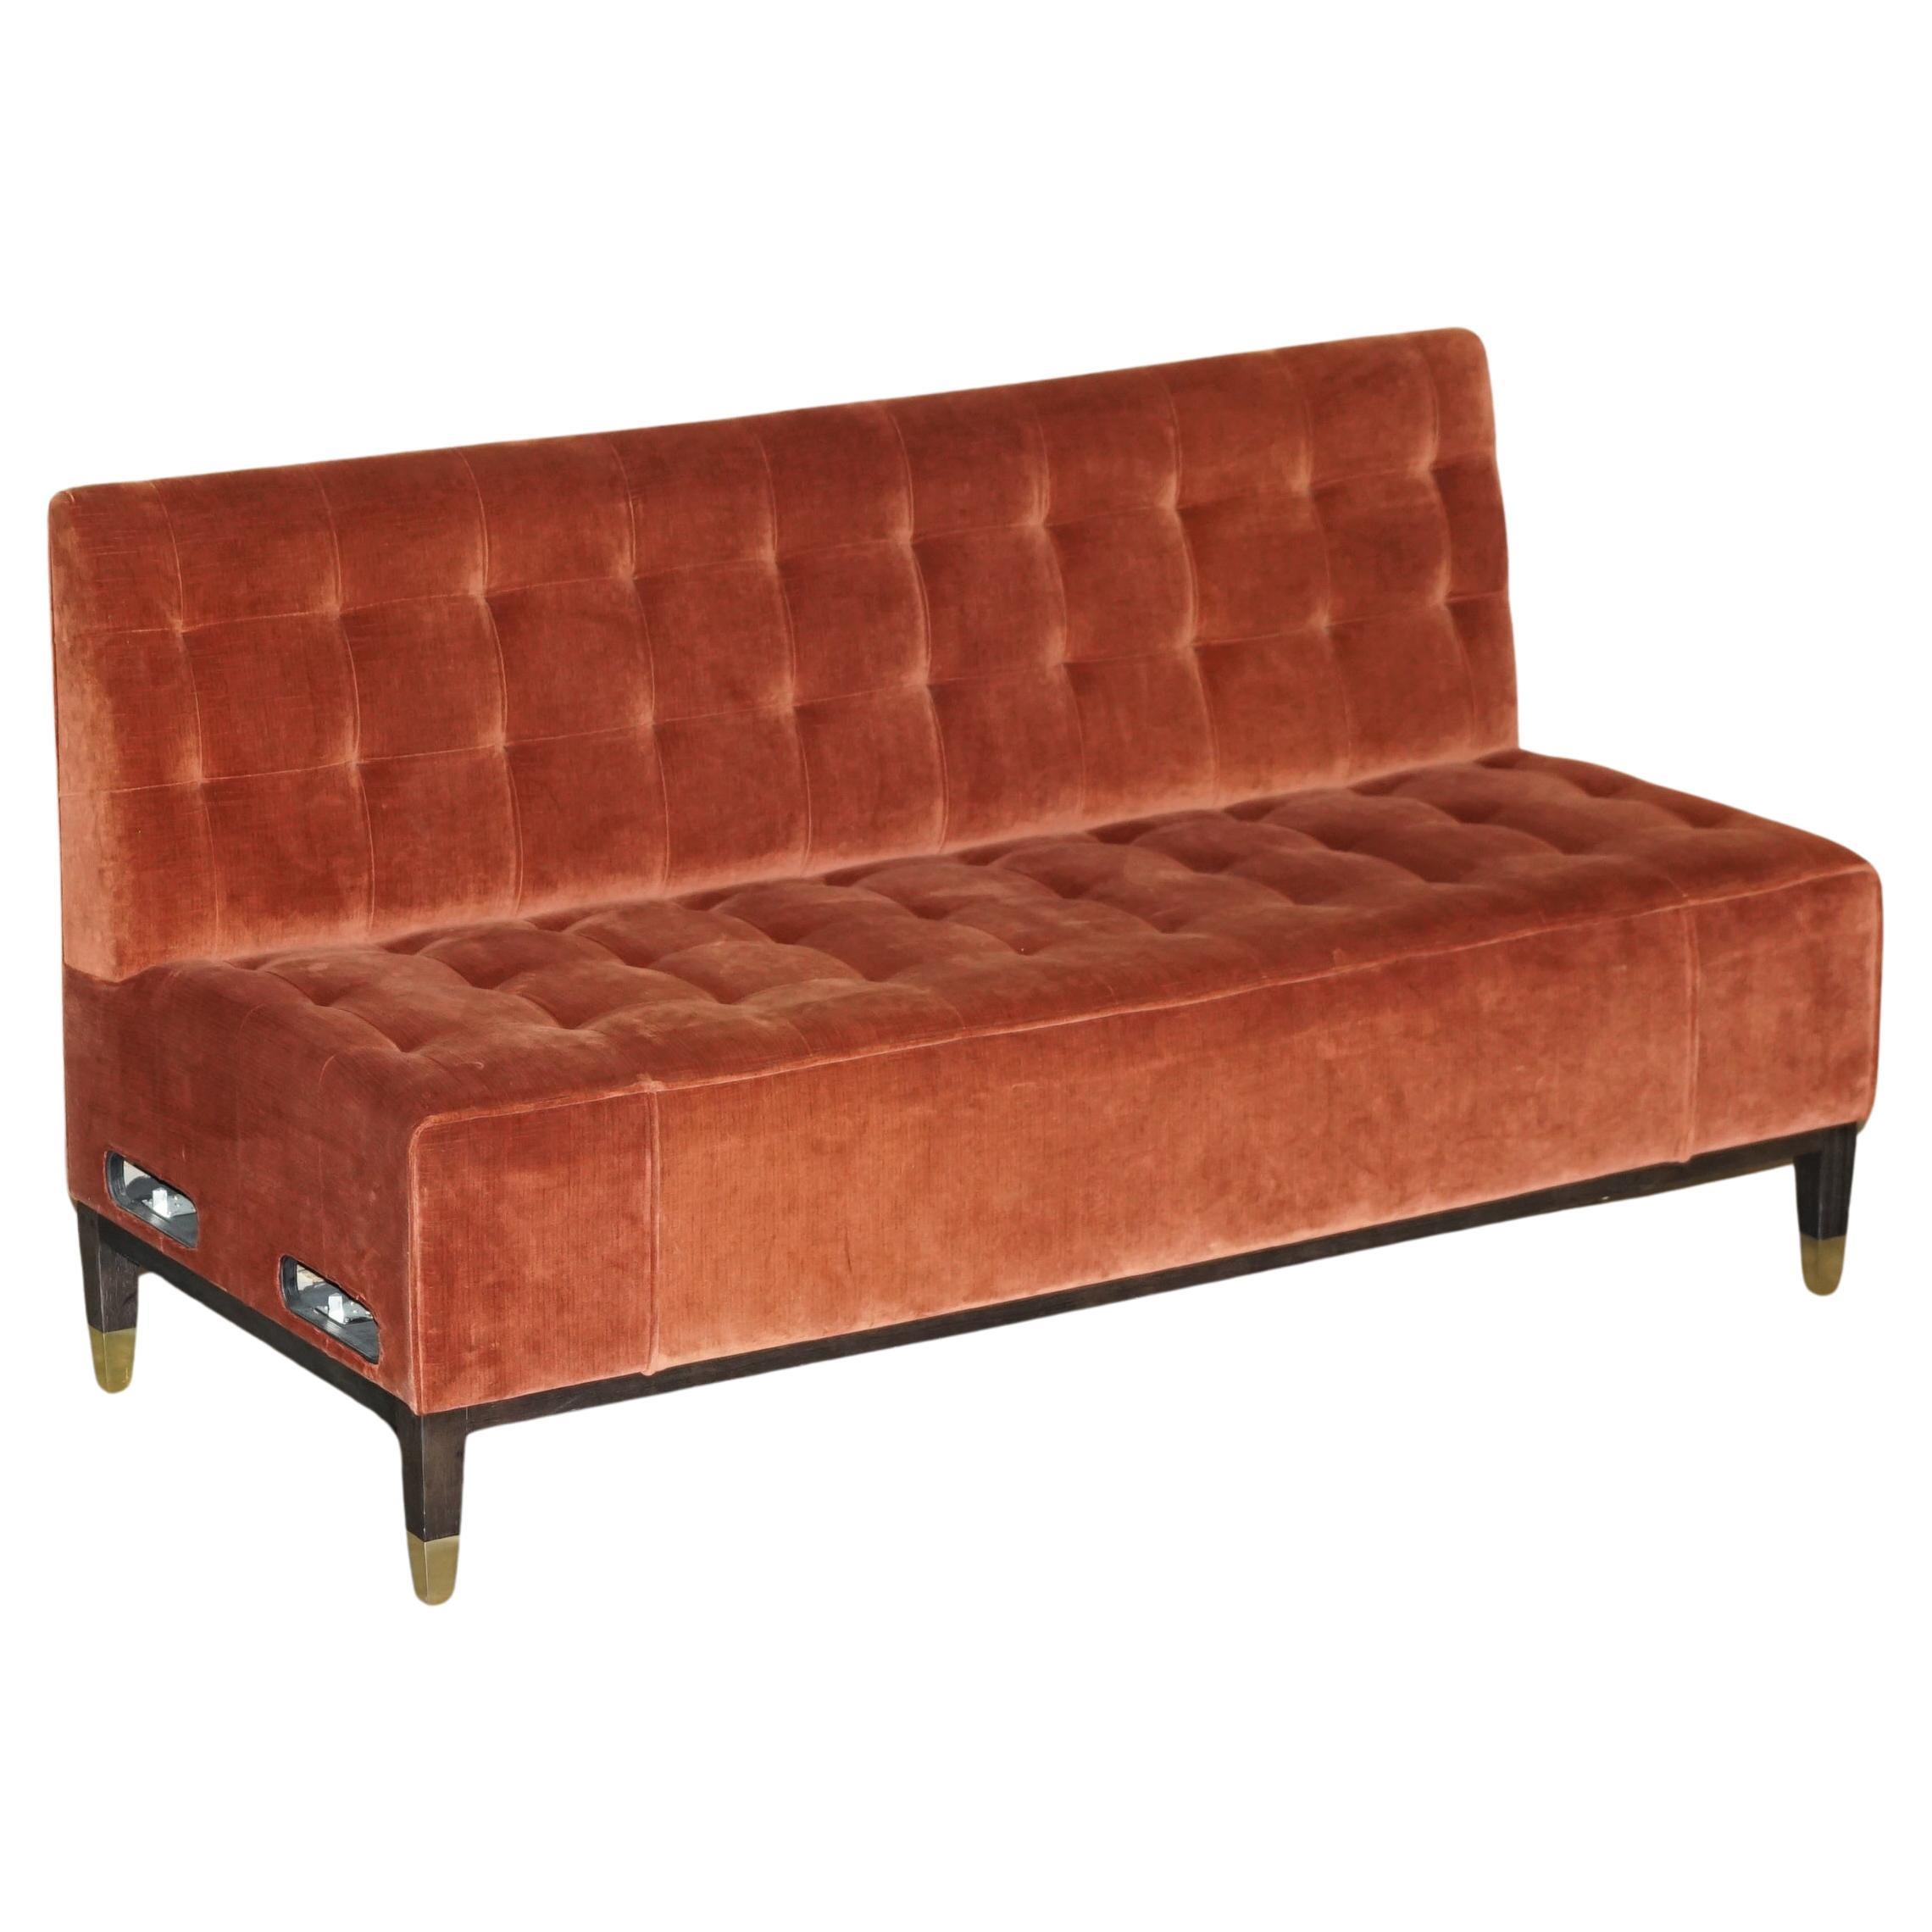 GEORGE SMITH CHELSSEA CHESTERFiELD TUFTED BENCH SOFA IN VELOUR UPHOLSTERY For Sale